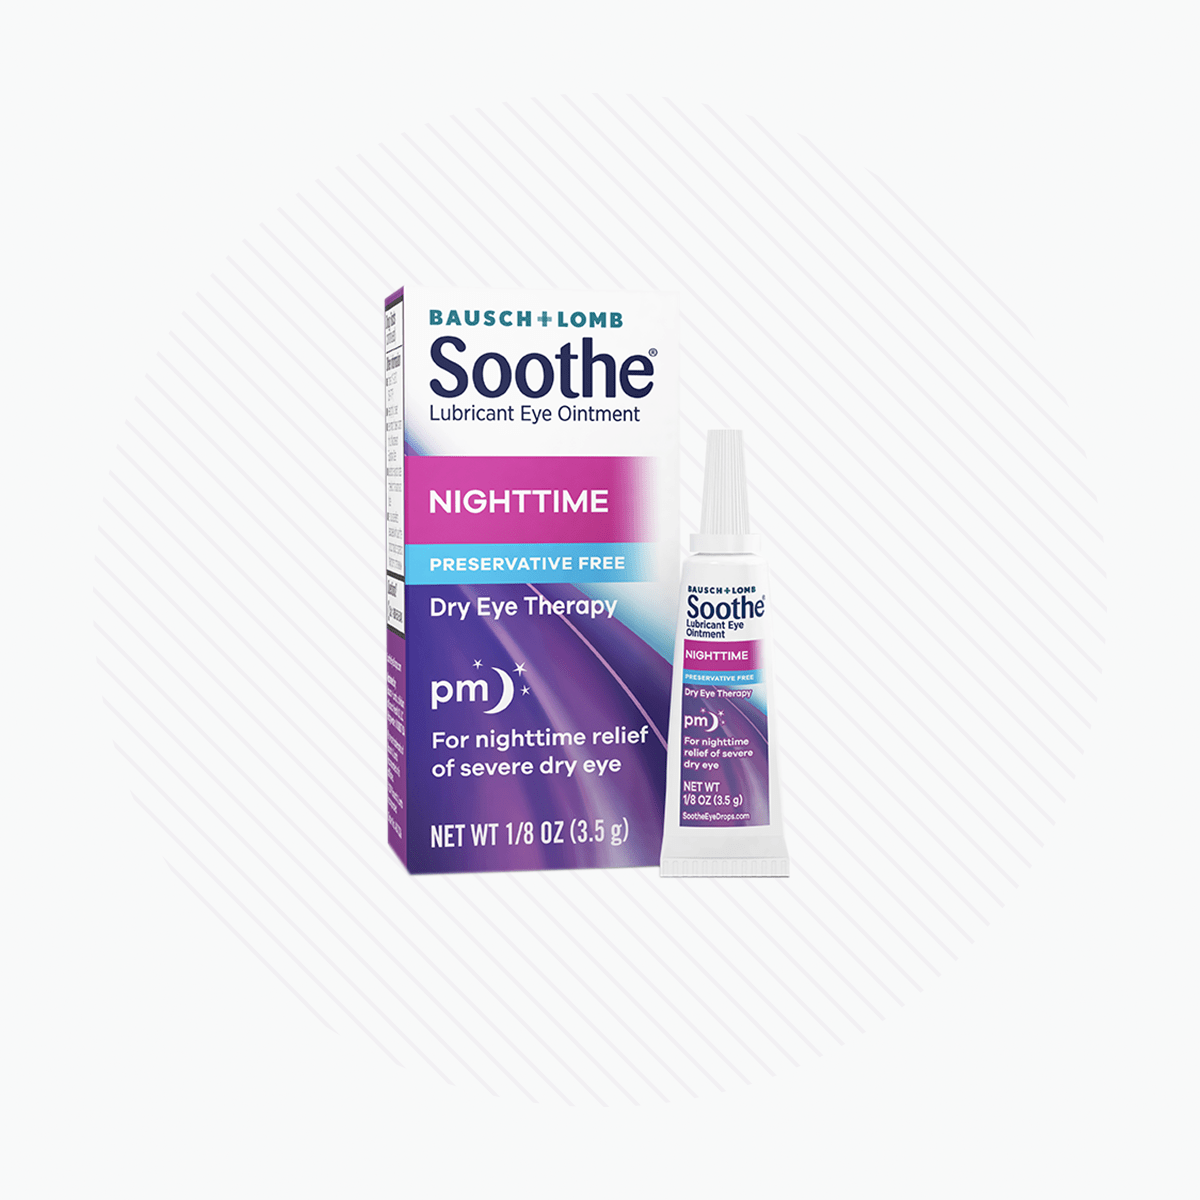 Soothe Eye Ointment by Bausch & Lomb, Lubricant Relief for Dry Eyes, Nighttime Dry Eye Therapy, Sensitive Eyes, Preservative Free, (1.8 Oz tube) - Dryeye Rescue